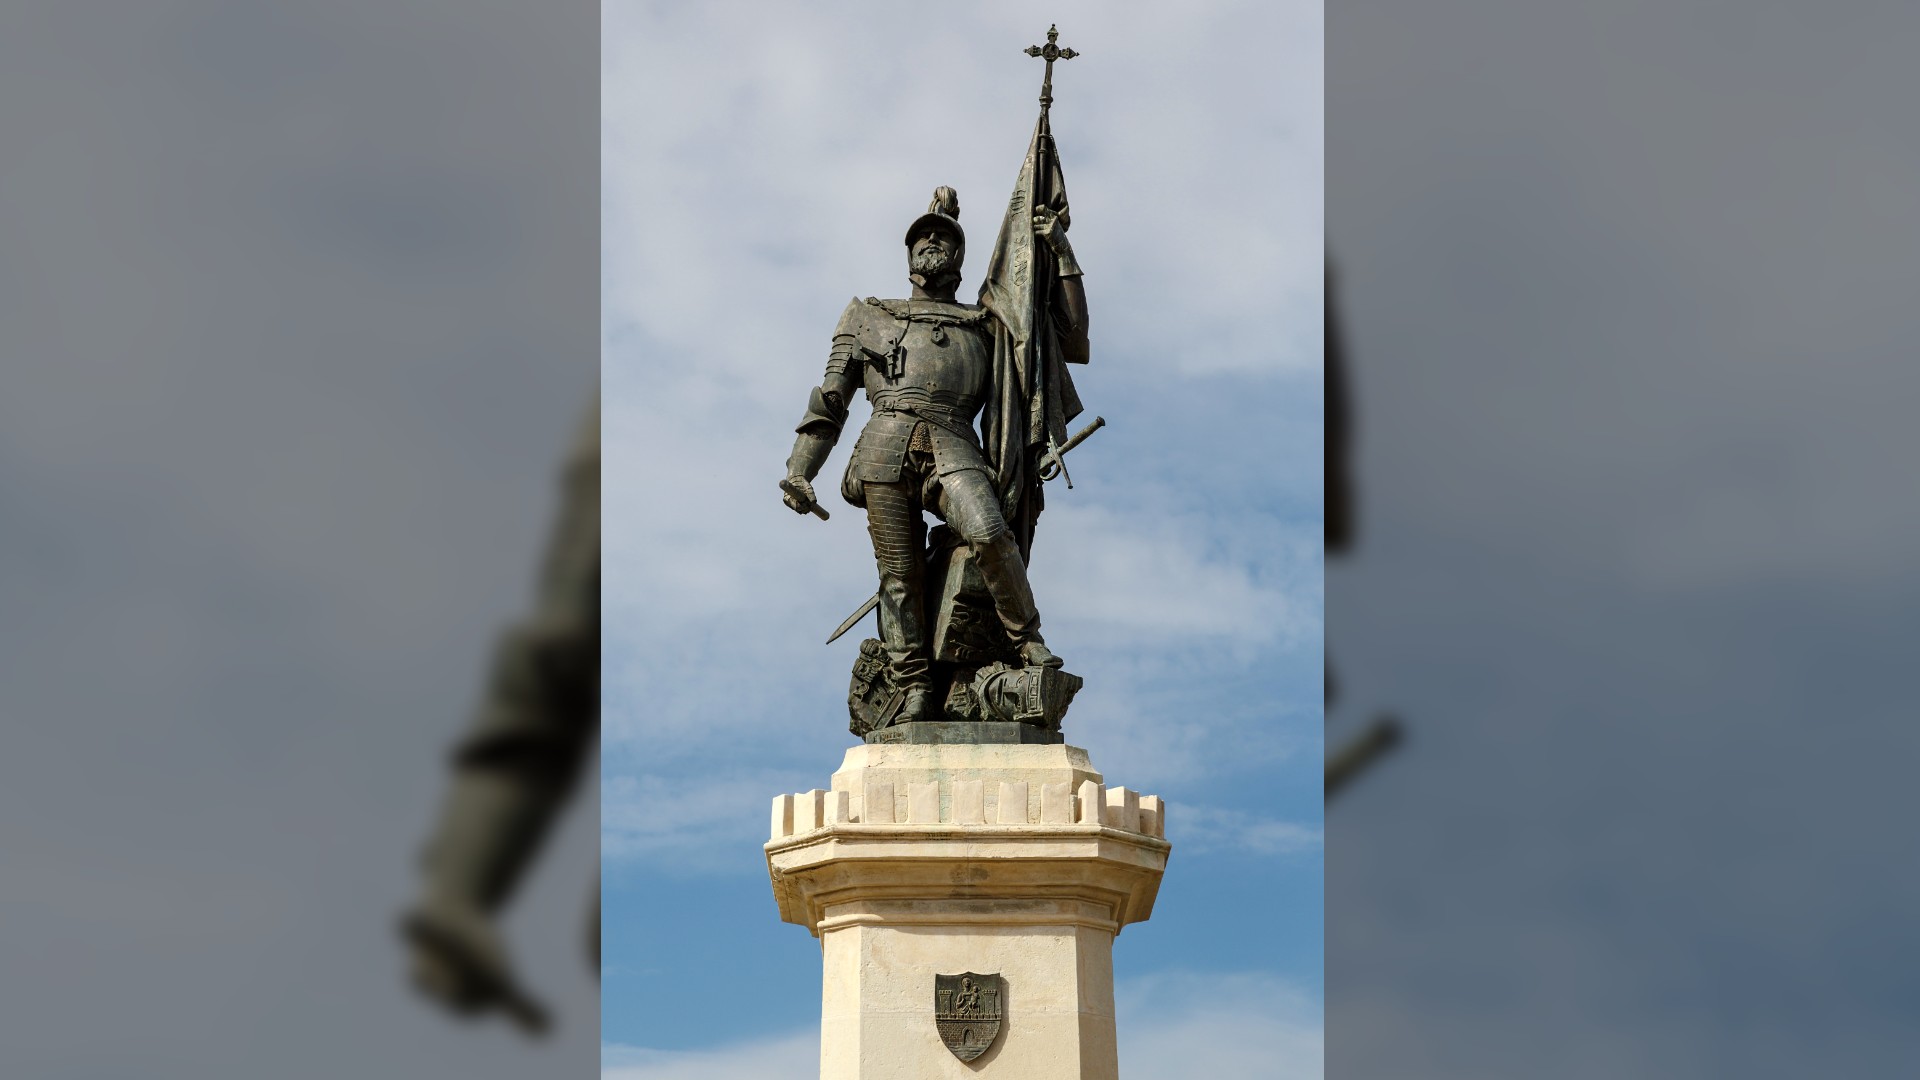 Statue of Hernan Cortes in Medellin, Spain. Here we see him standing tall wearing armor and a helmet (complete with a plume on top). He’s holding a flag/banner with a small cross on the top. He is standing upon a plinth which looks like a castle tower. On the front of the plinth is a small shield which depicts a knight standing upon a castle rampart.